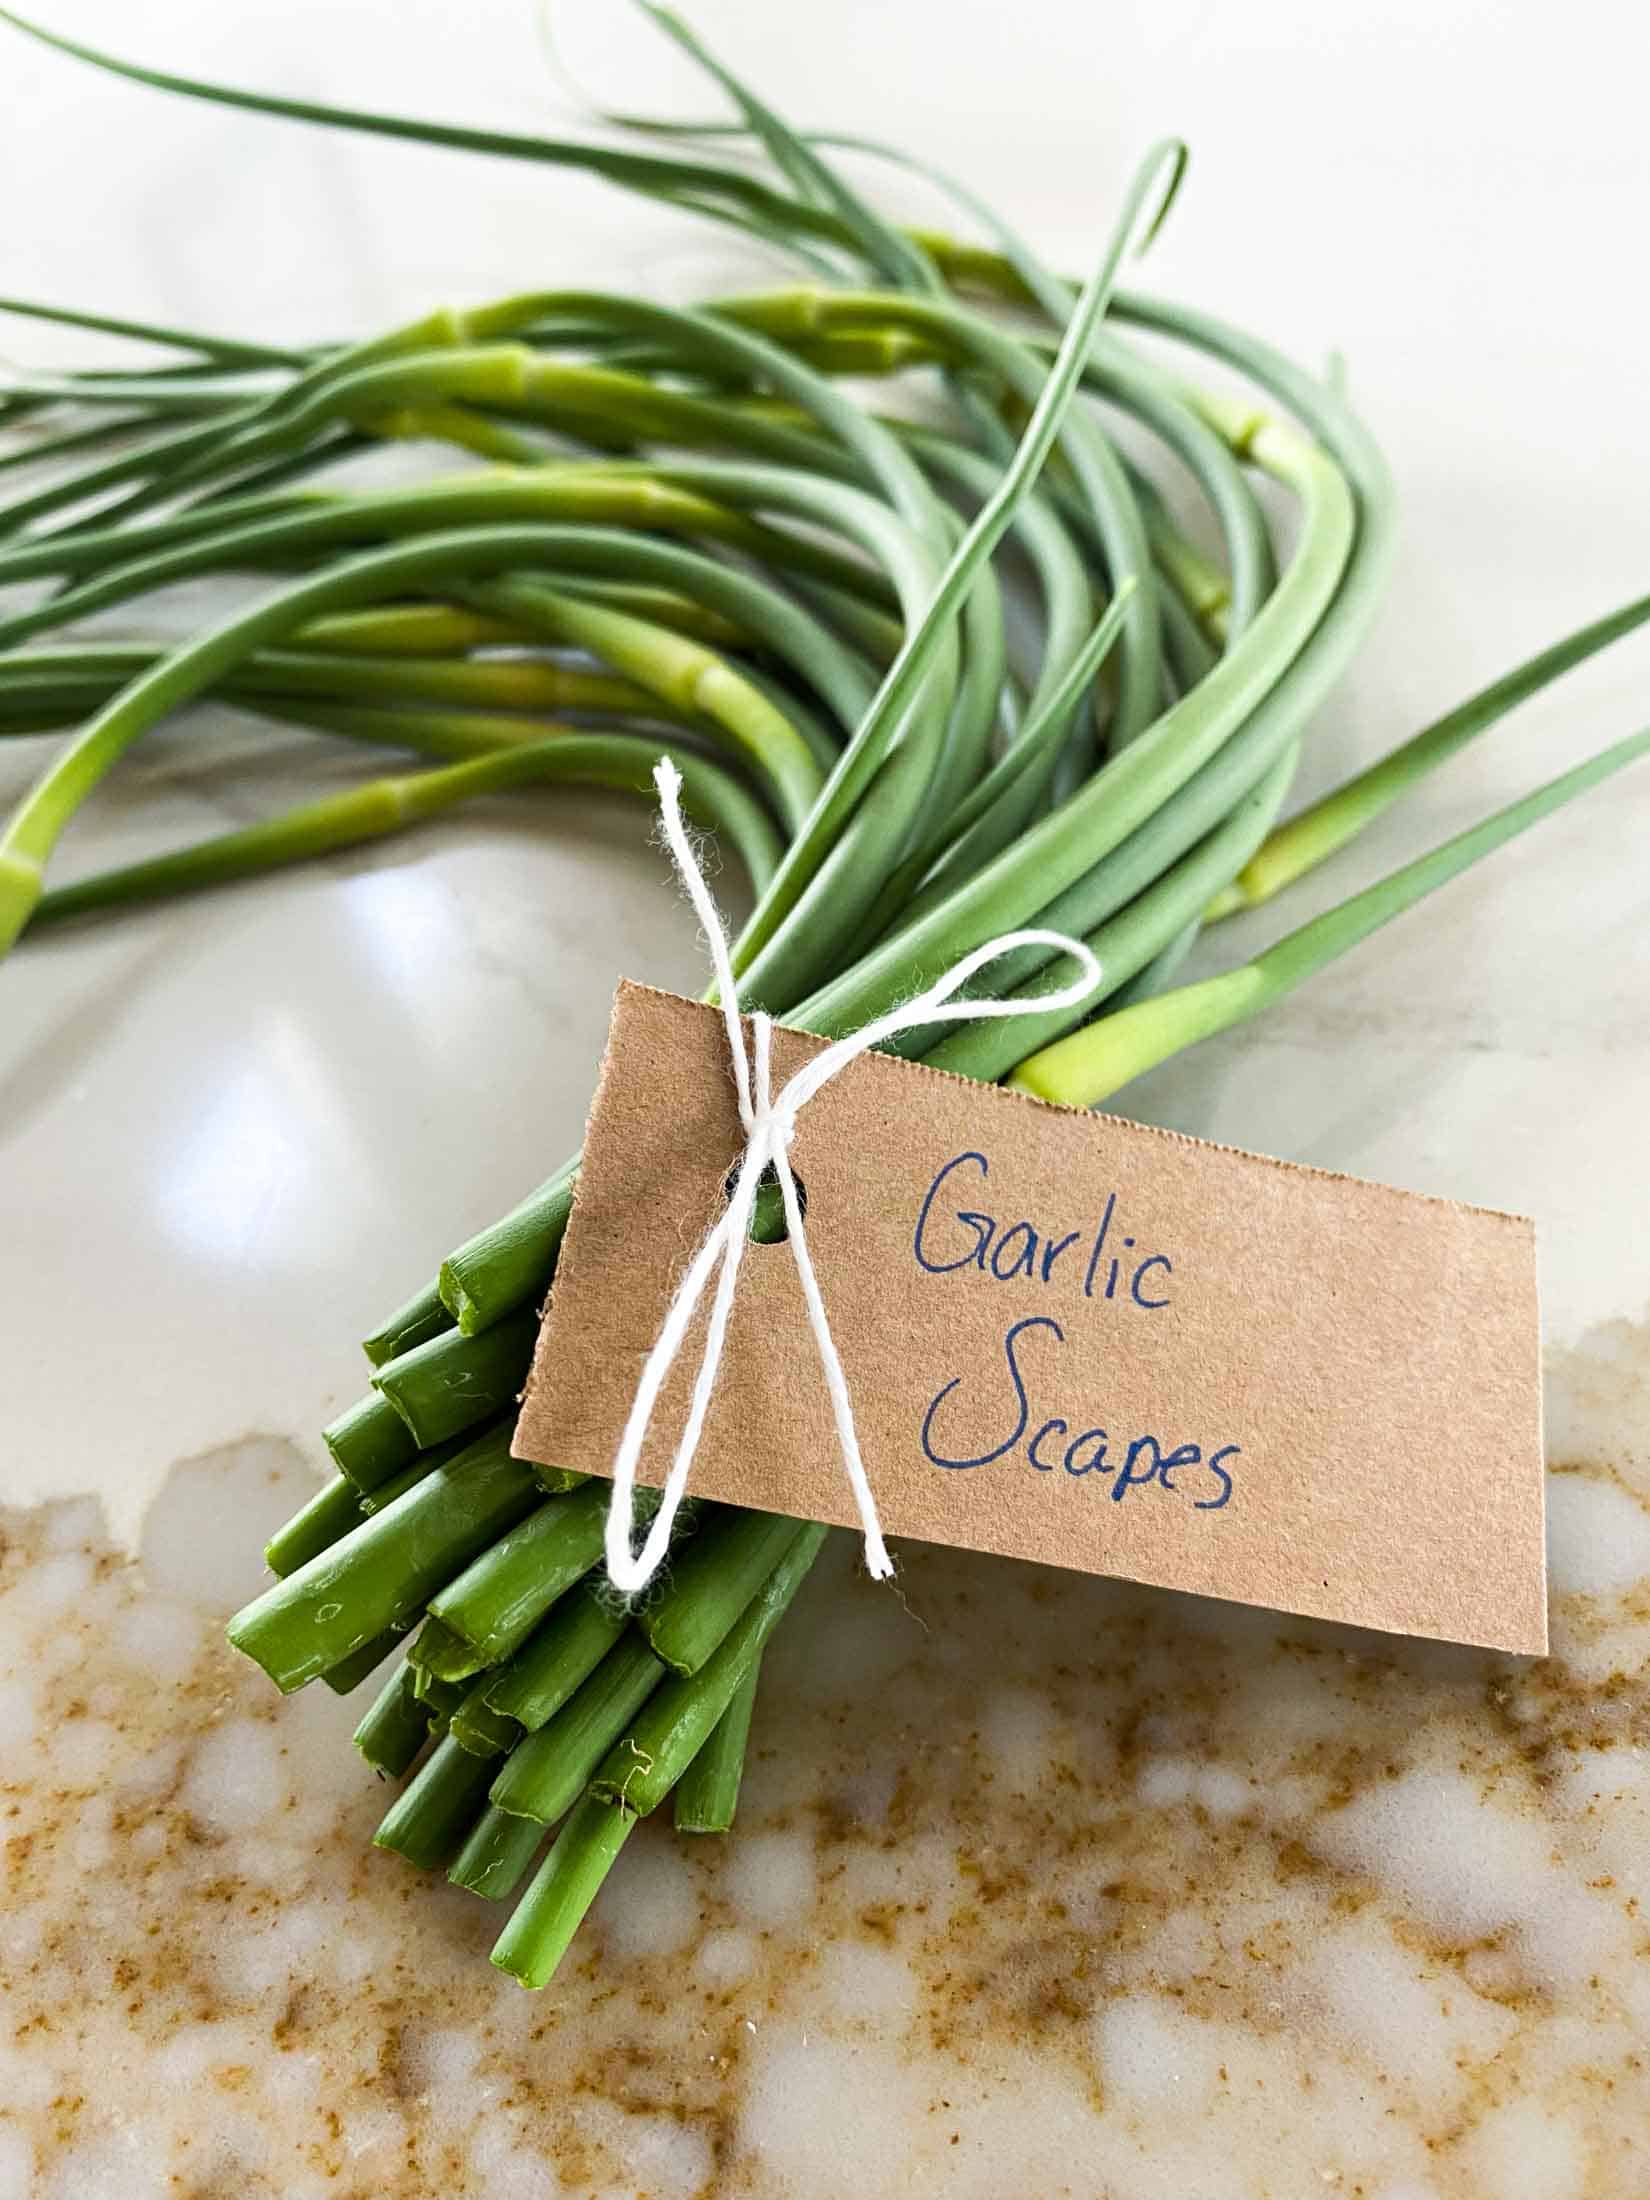 Freshly harvested garlic scapes tied with white string and a brown tag.